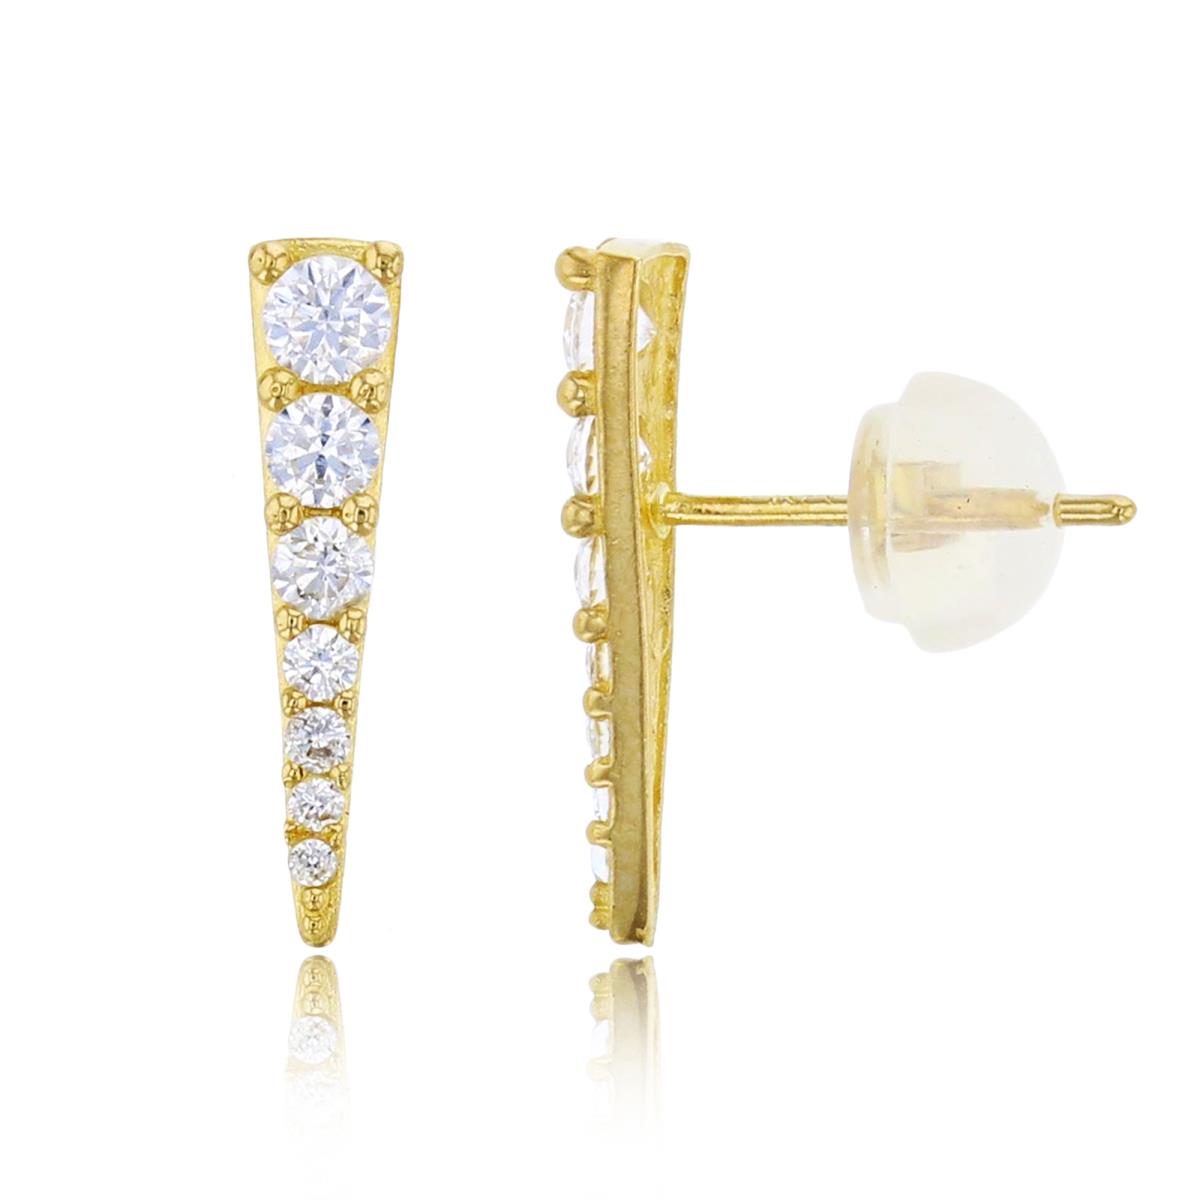 10K Yellow Gold 14x3mm Paved Spike Stud Earring